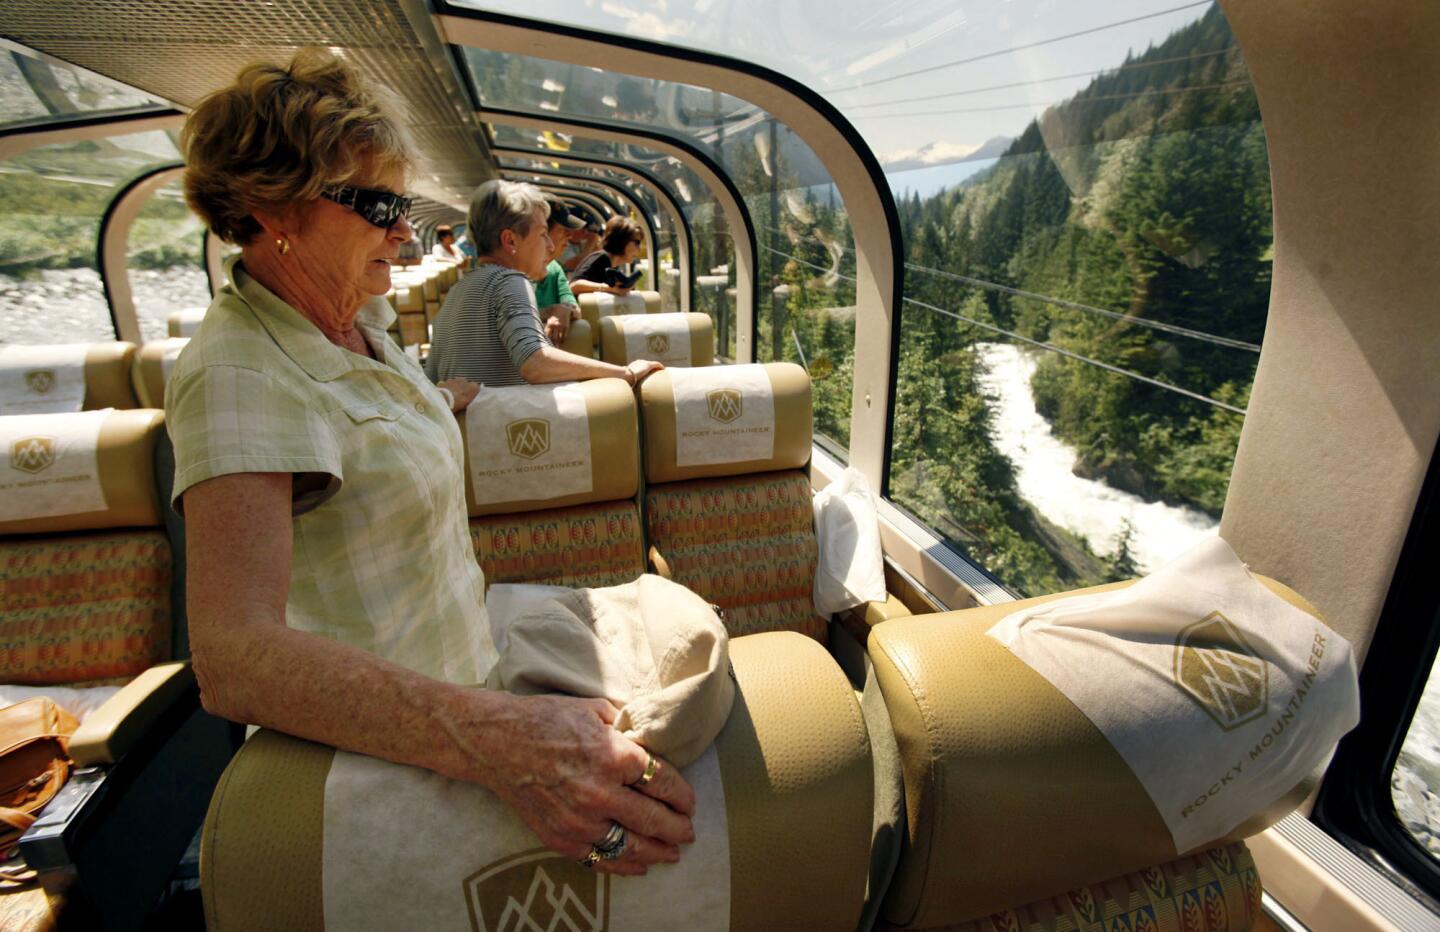 On the Rocky Mountaineer